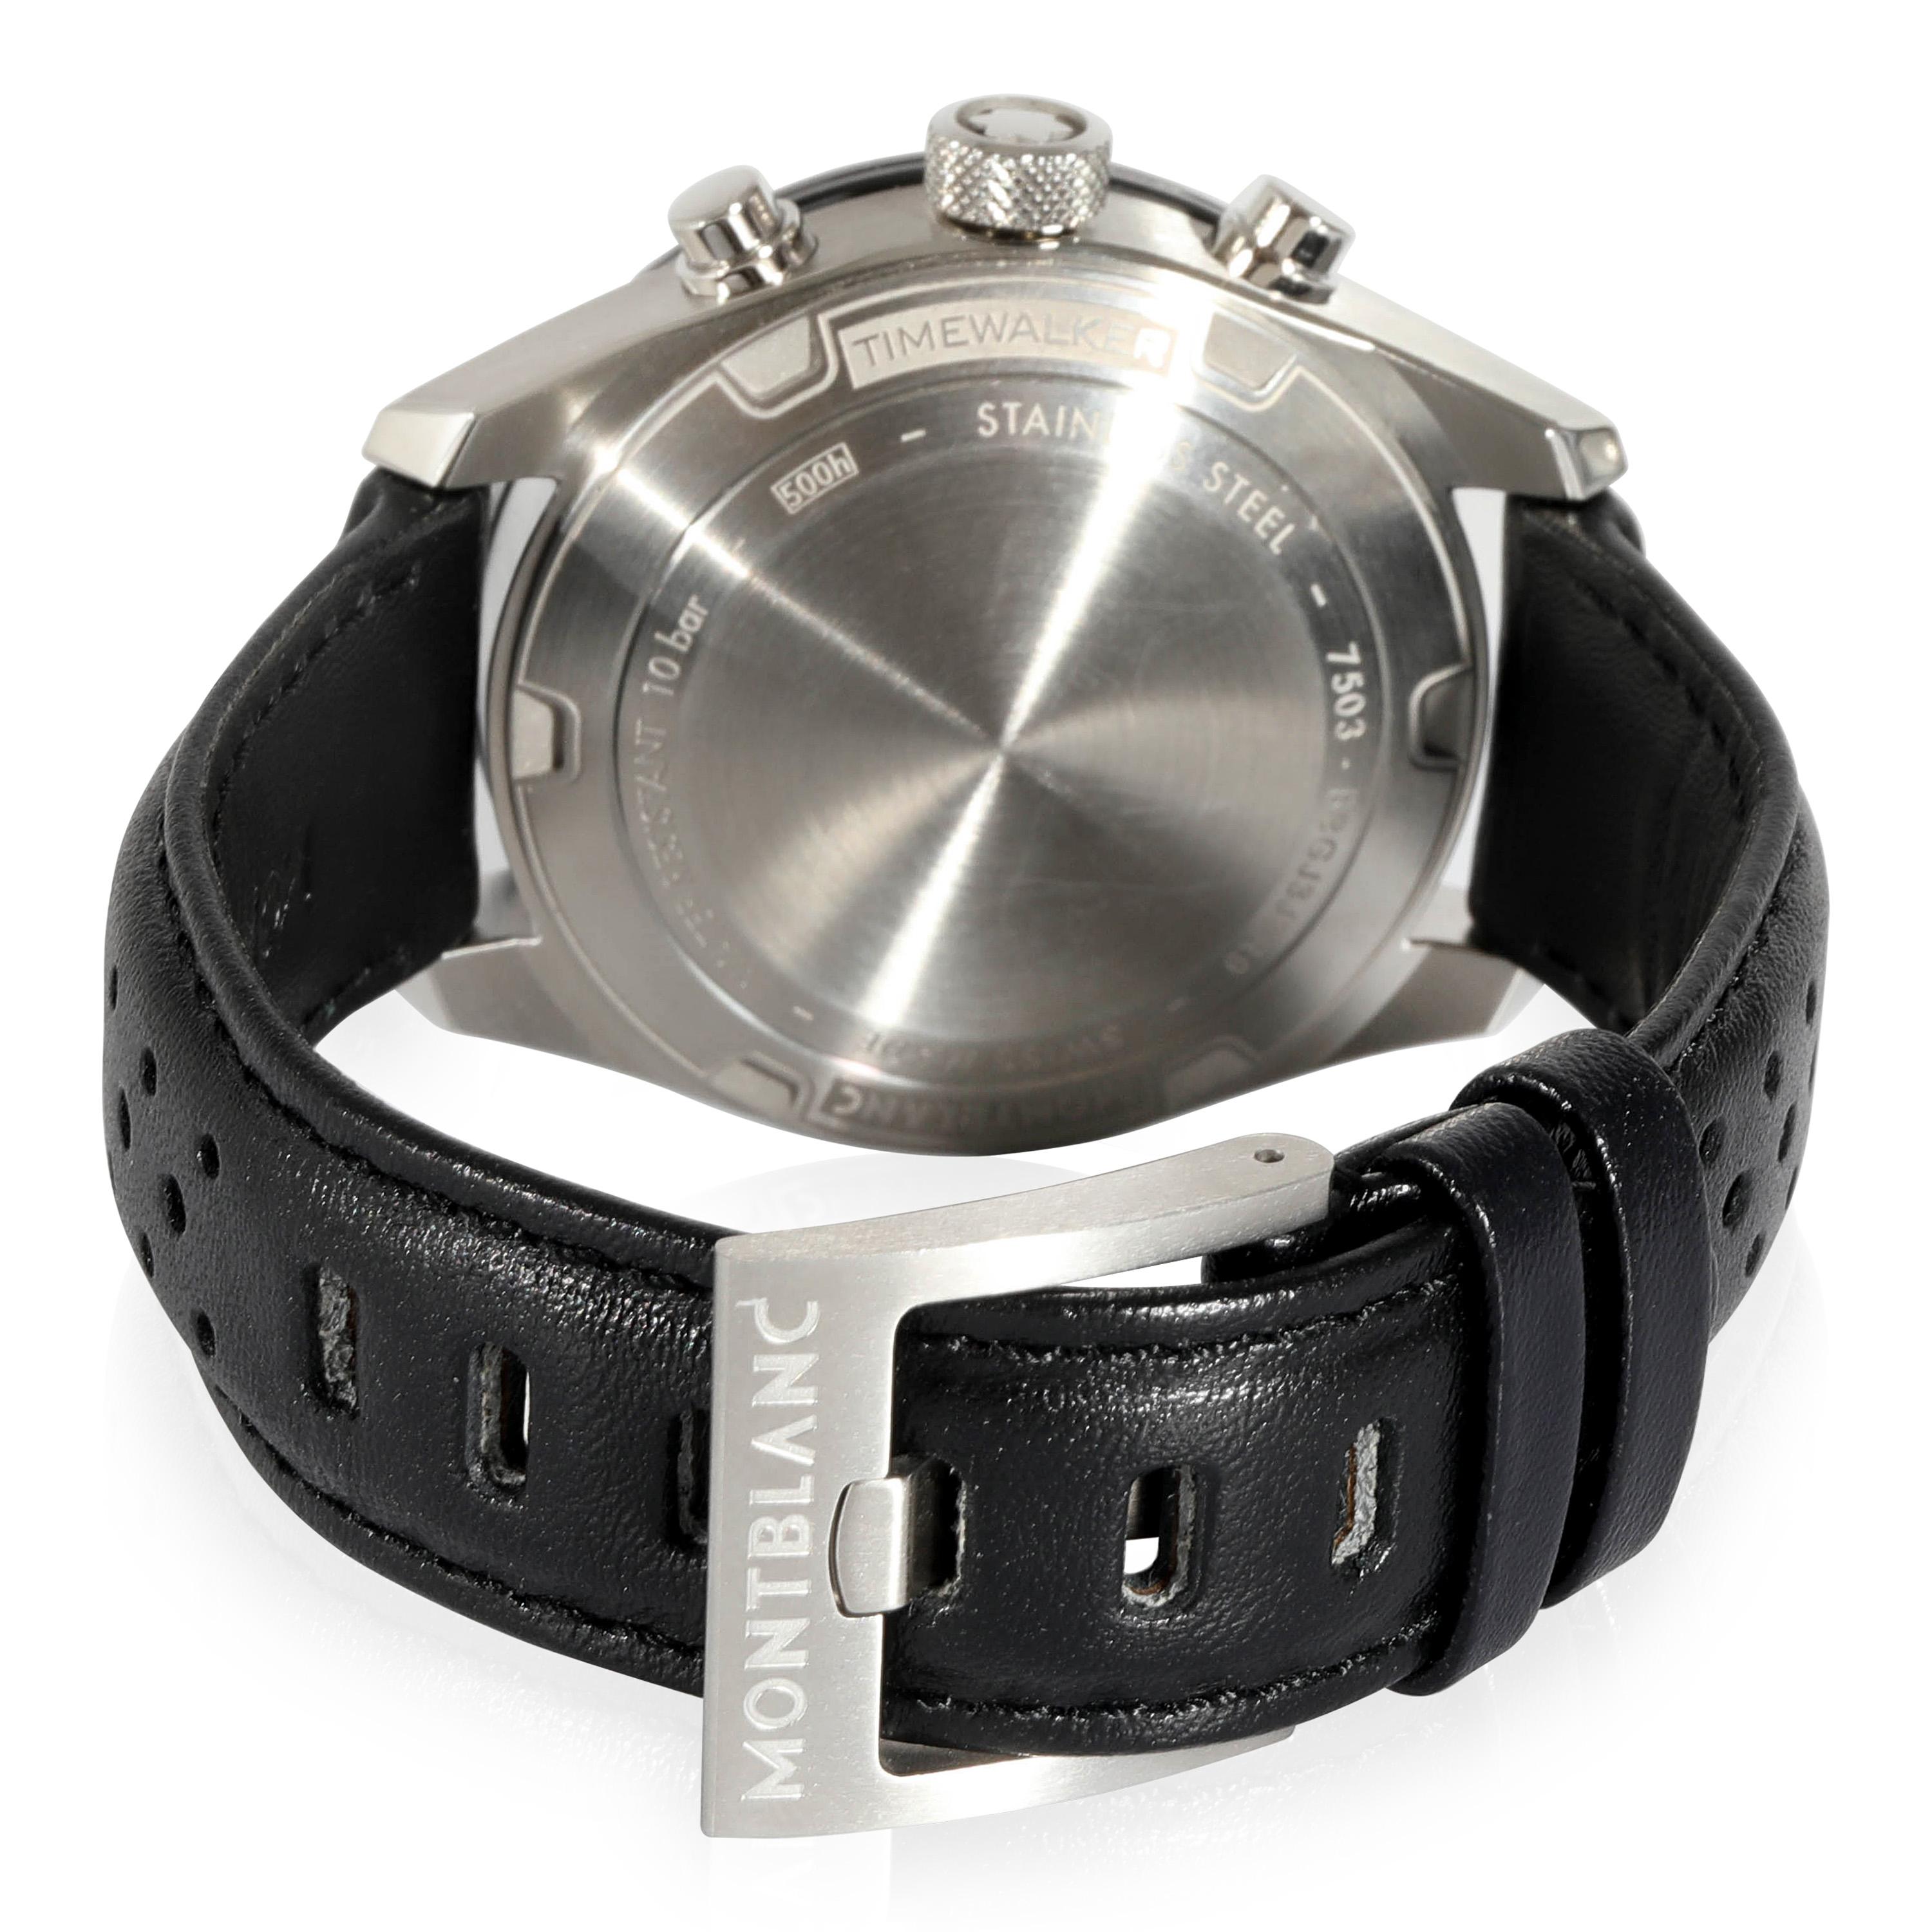 Montblanc Timewalker 119941  7503 Men's Watch in  Stainless Steel/Ceramic

SKU: 132219

PRIMARY DETAILS
Brand: Montblanc
Model: Timewalker
Country of Origin: Switzerland
Movement Type: Mechanical: Automatic/Kinetic
Year of Manufacture: